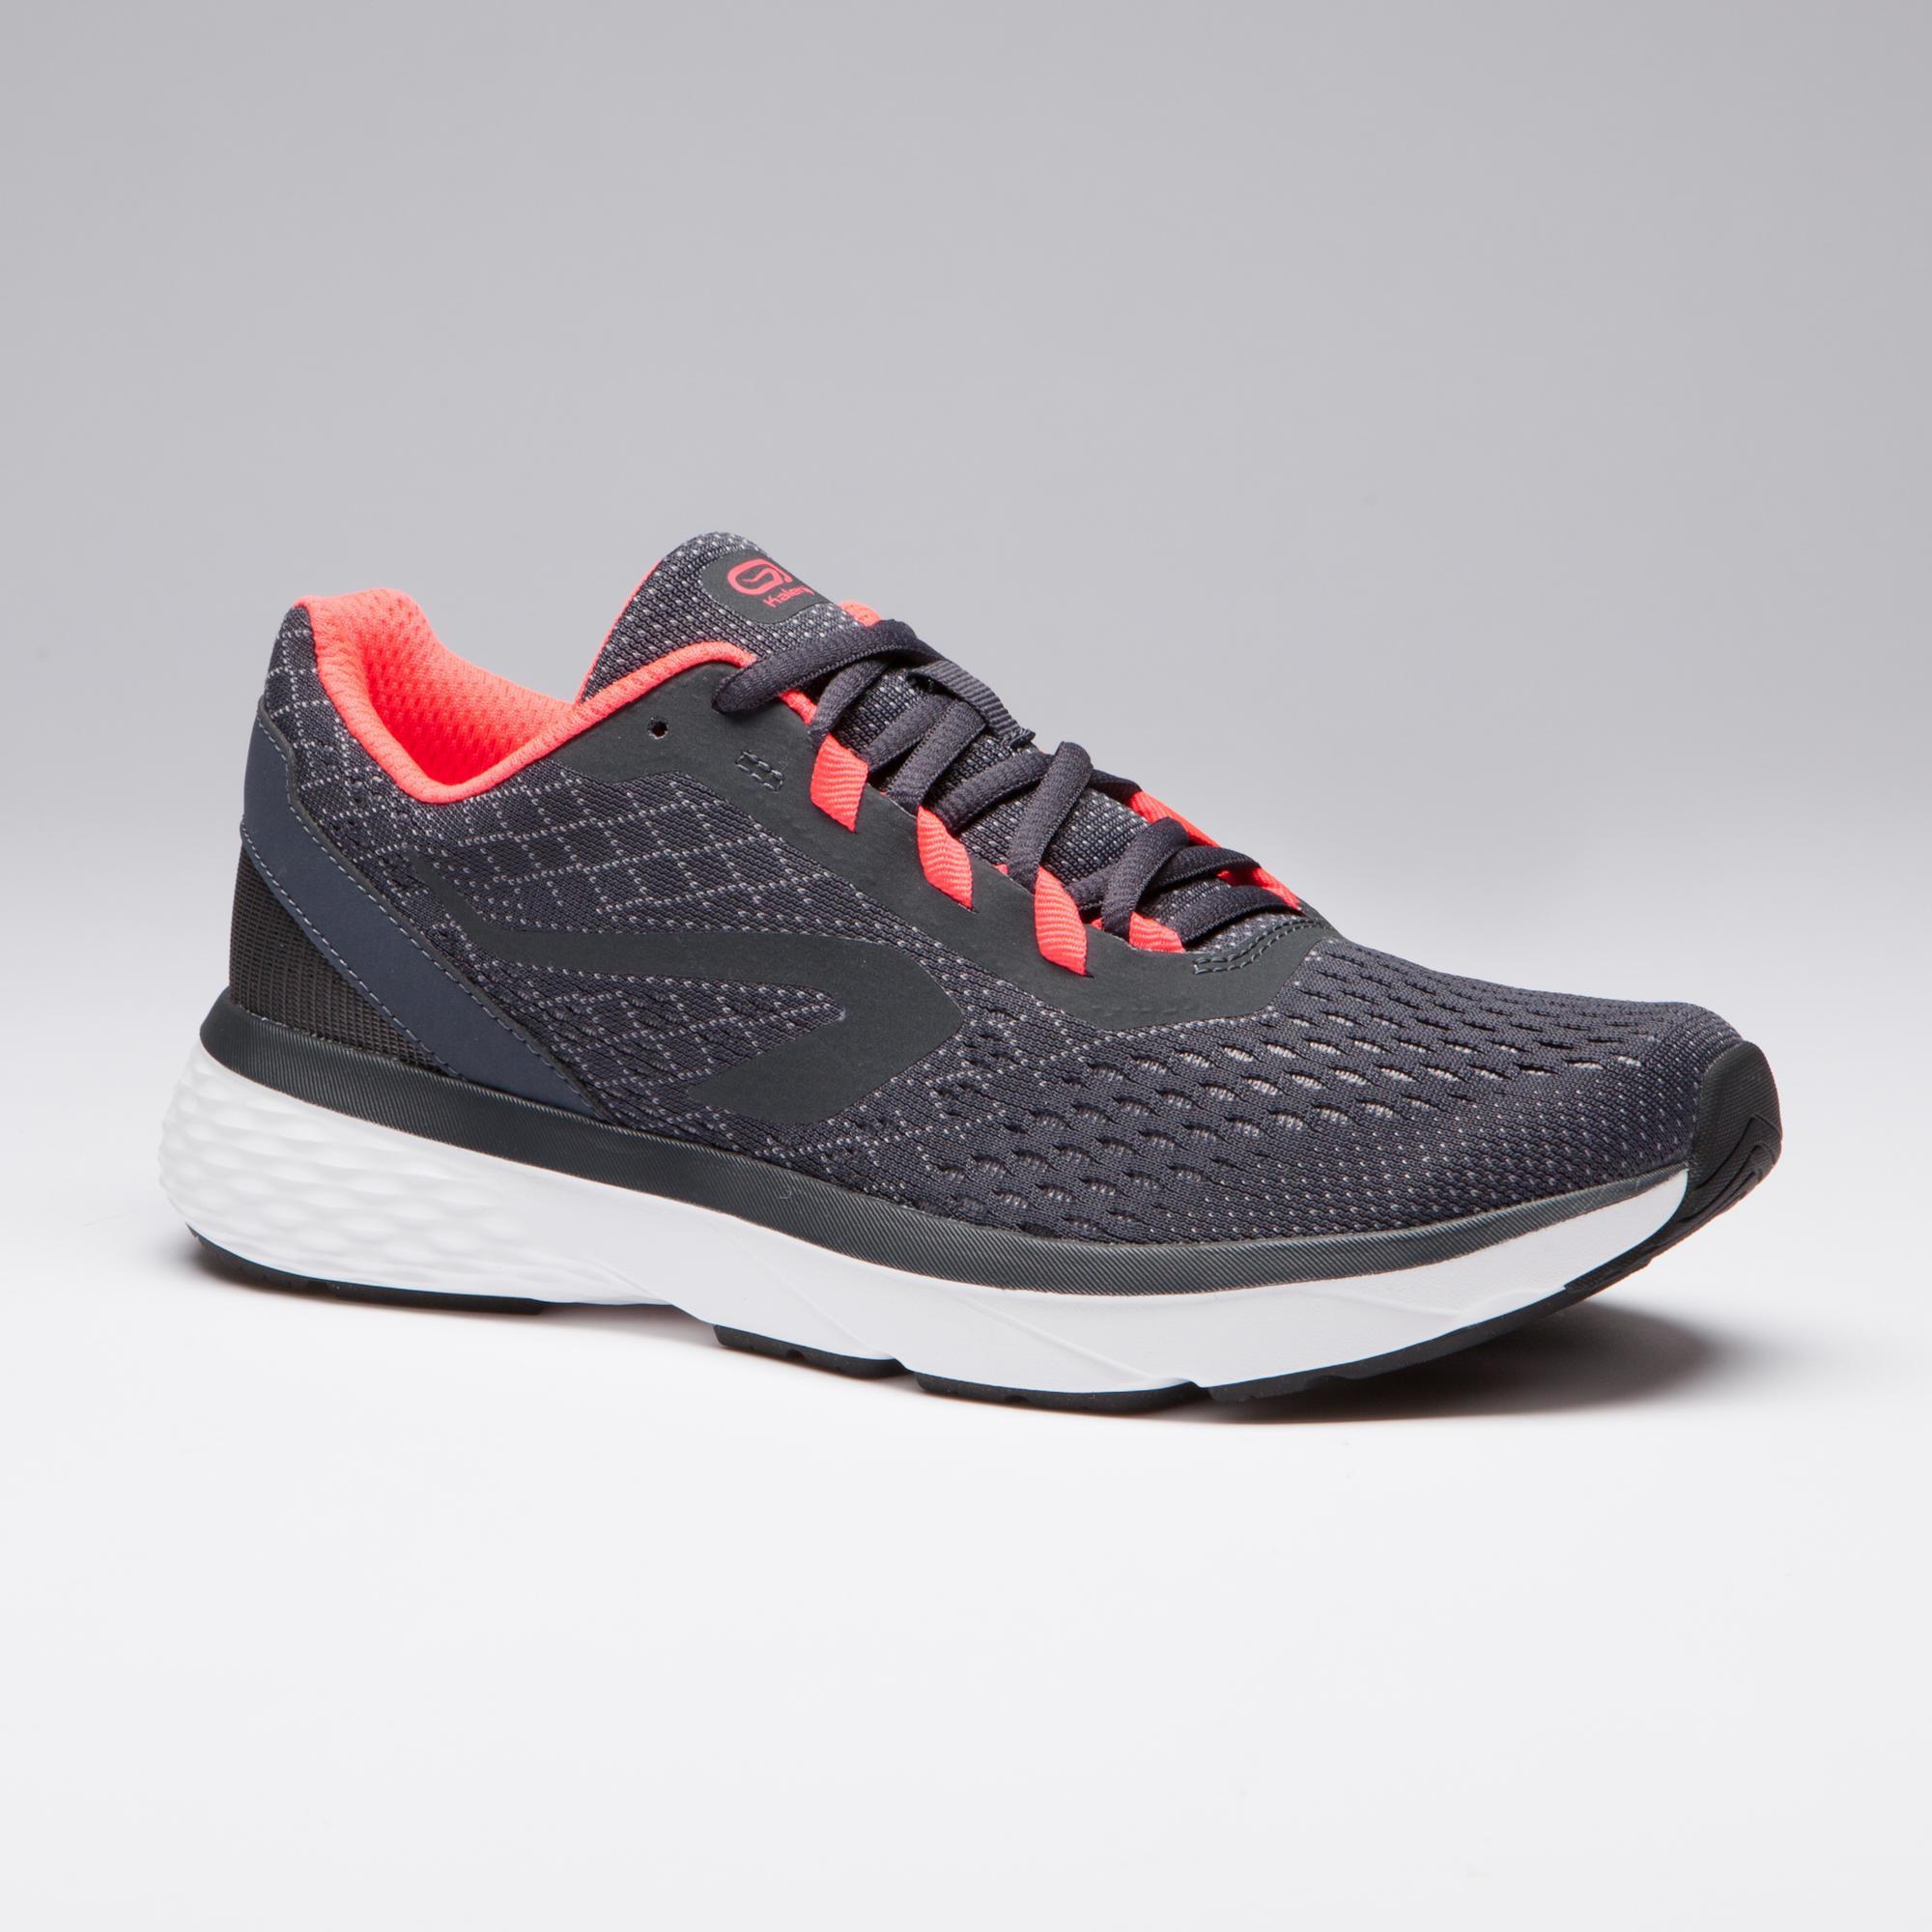 RUN SUPPORT WOMEN'S RUNNING SHOES CORAL 